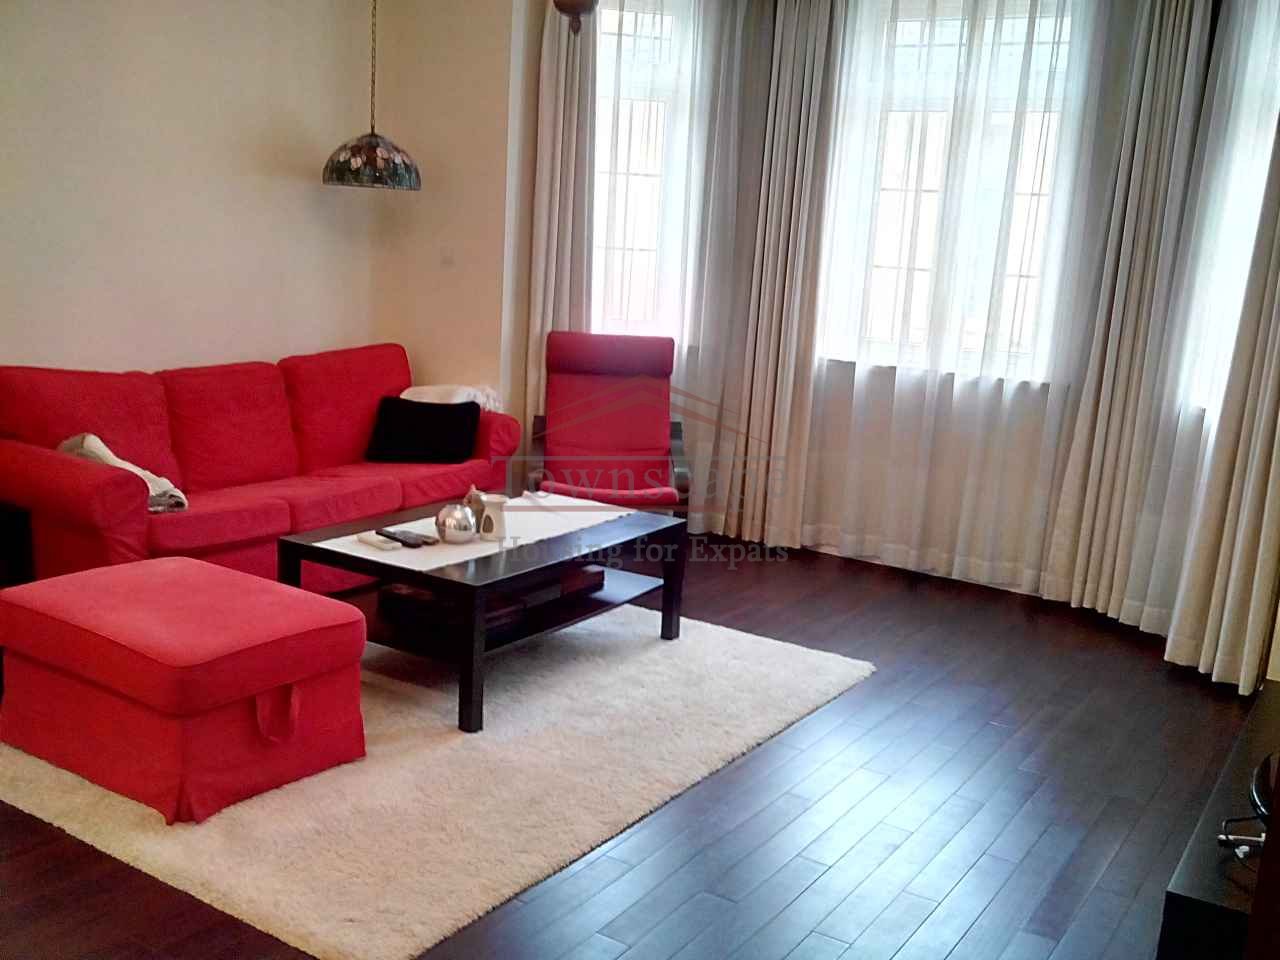  Excellent 2 Bedroom Apartment for rent in Shanghai French Concession